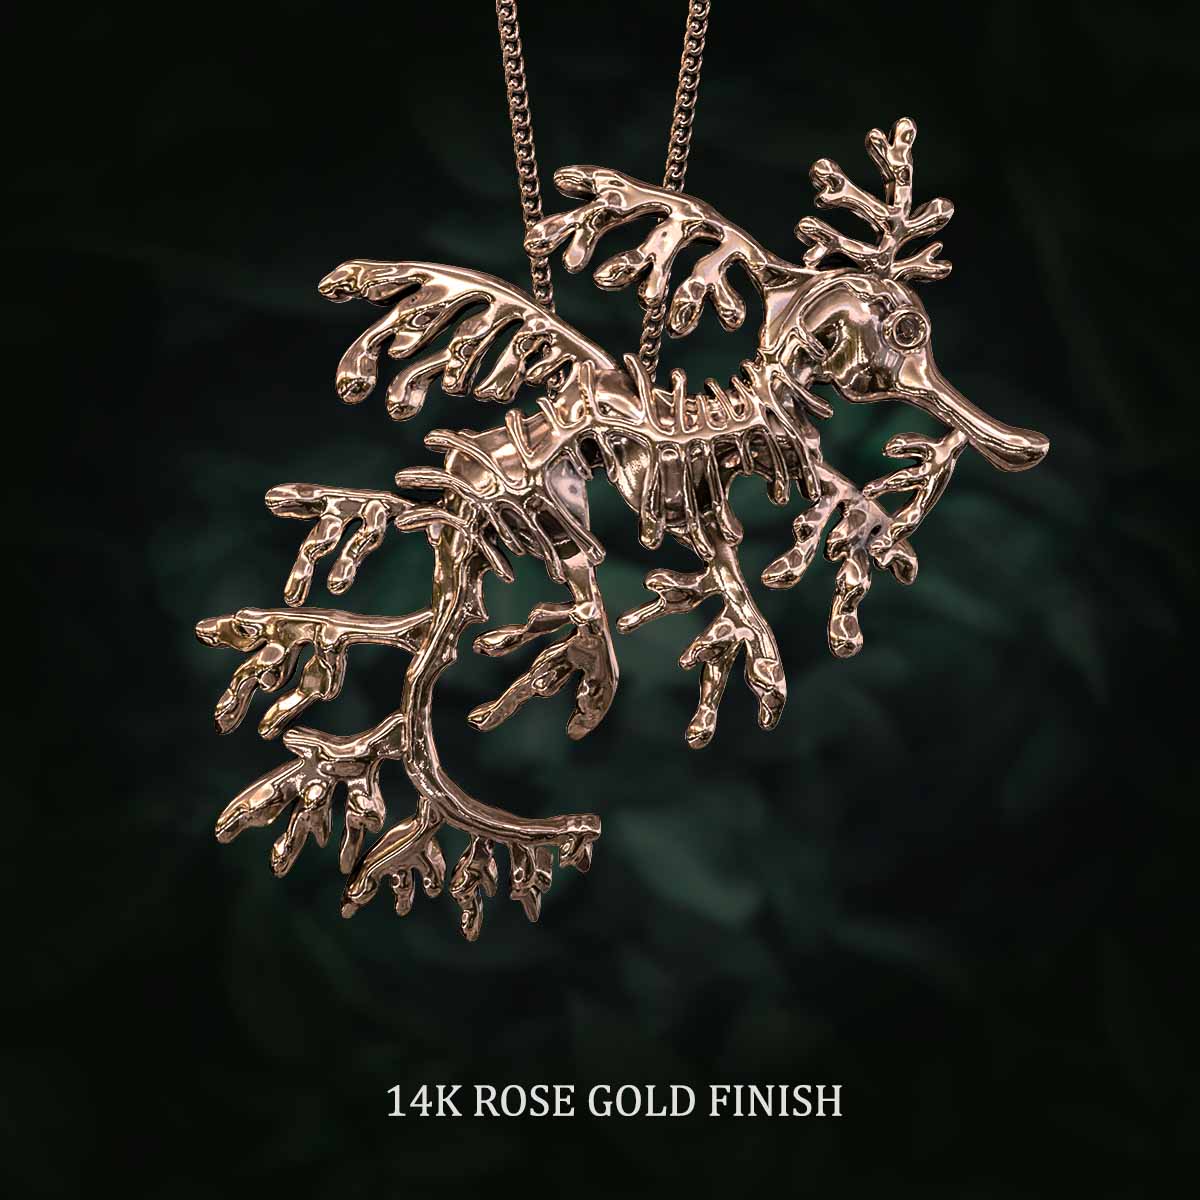 14k-Rose-Gold-Finish-Leafy-Sea-Dragon-Pendant-Jewelry-For-Necklace